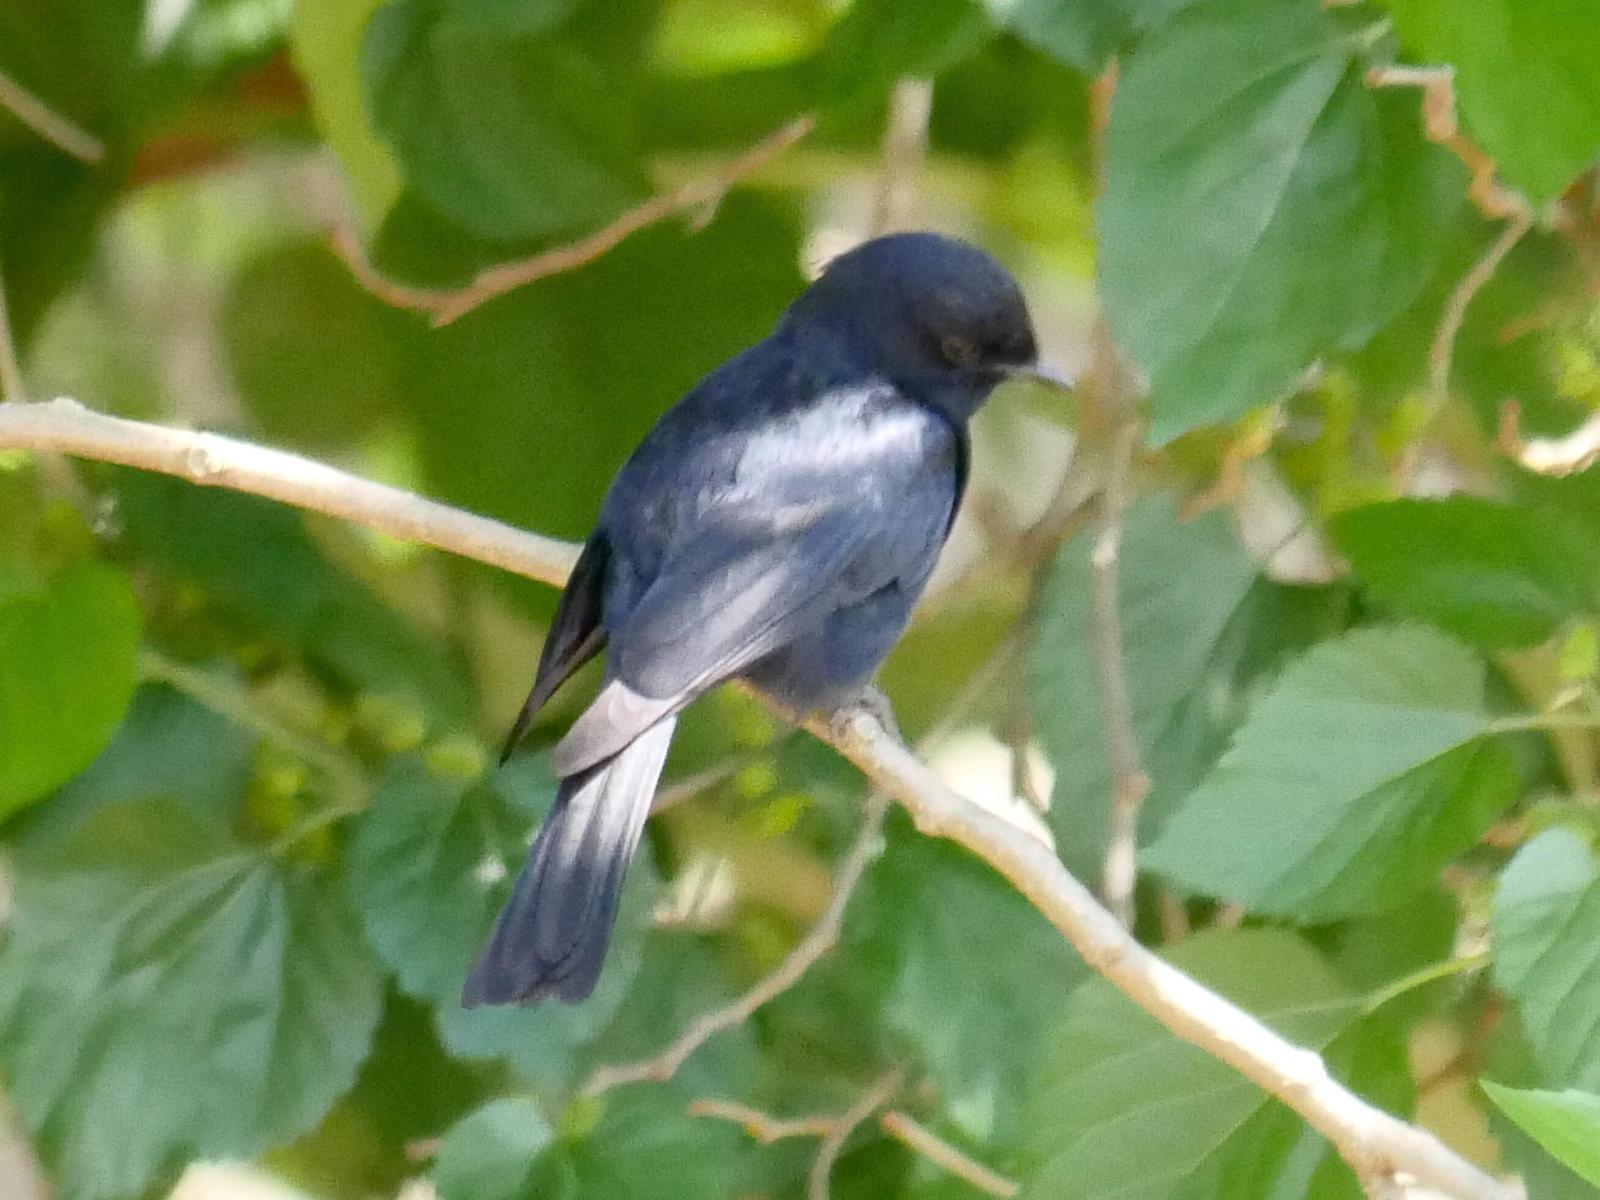 square-tailed drongo sp. Photo by Peter Lowe